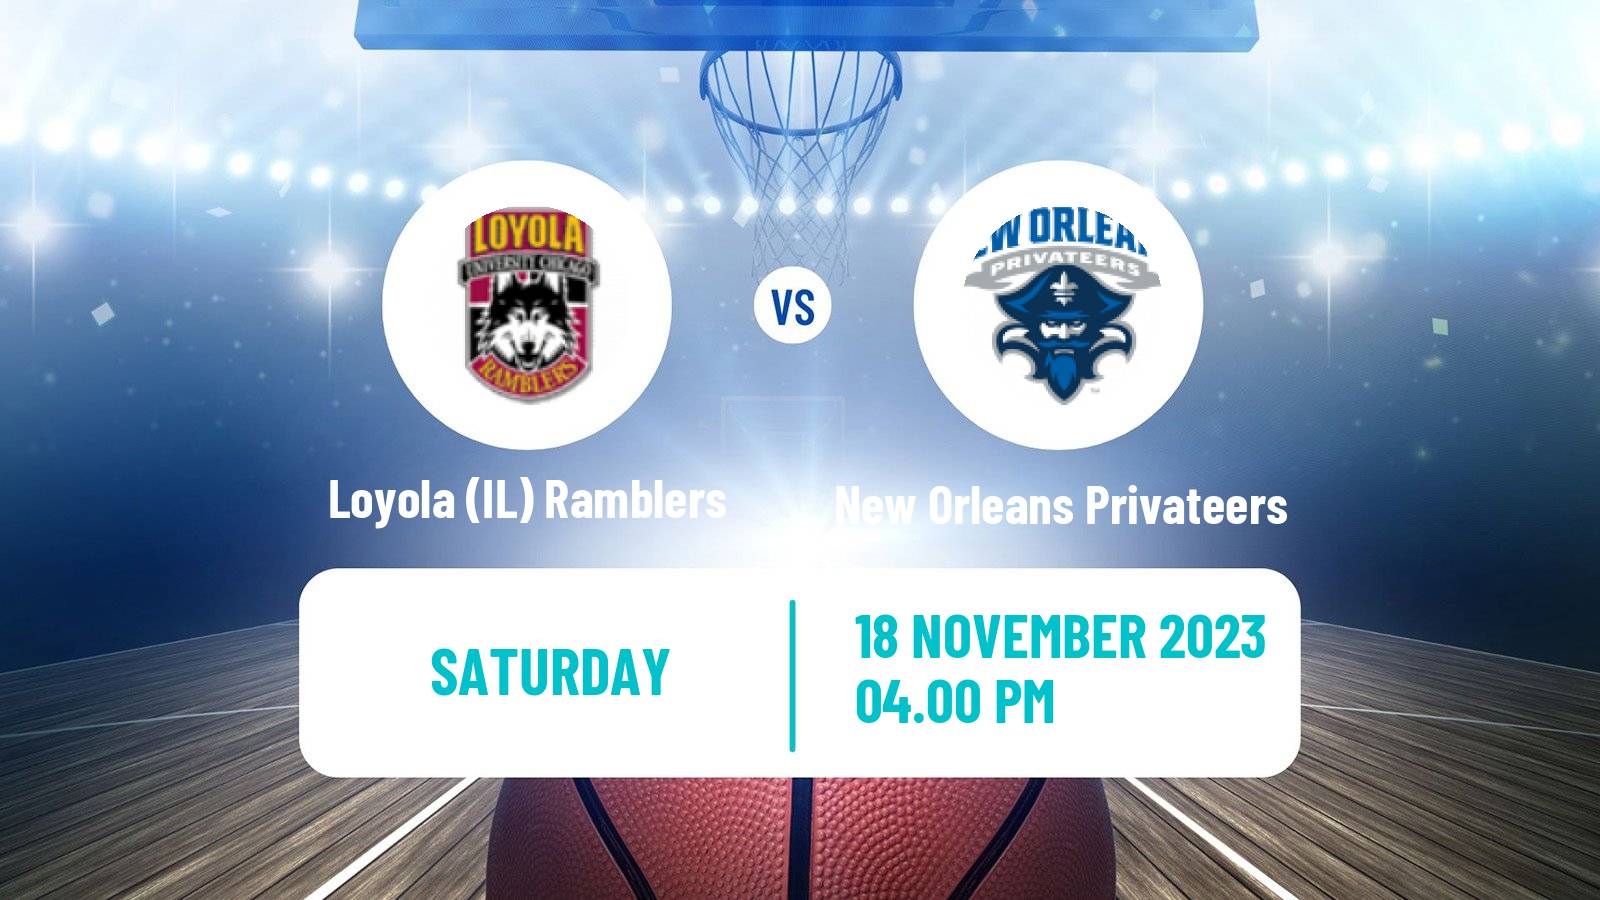 Basketball NCAA College Basketball Loyola (IL) Ramblers - New Orleans Privateers